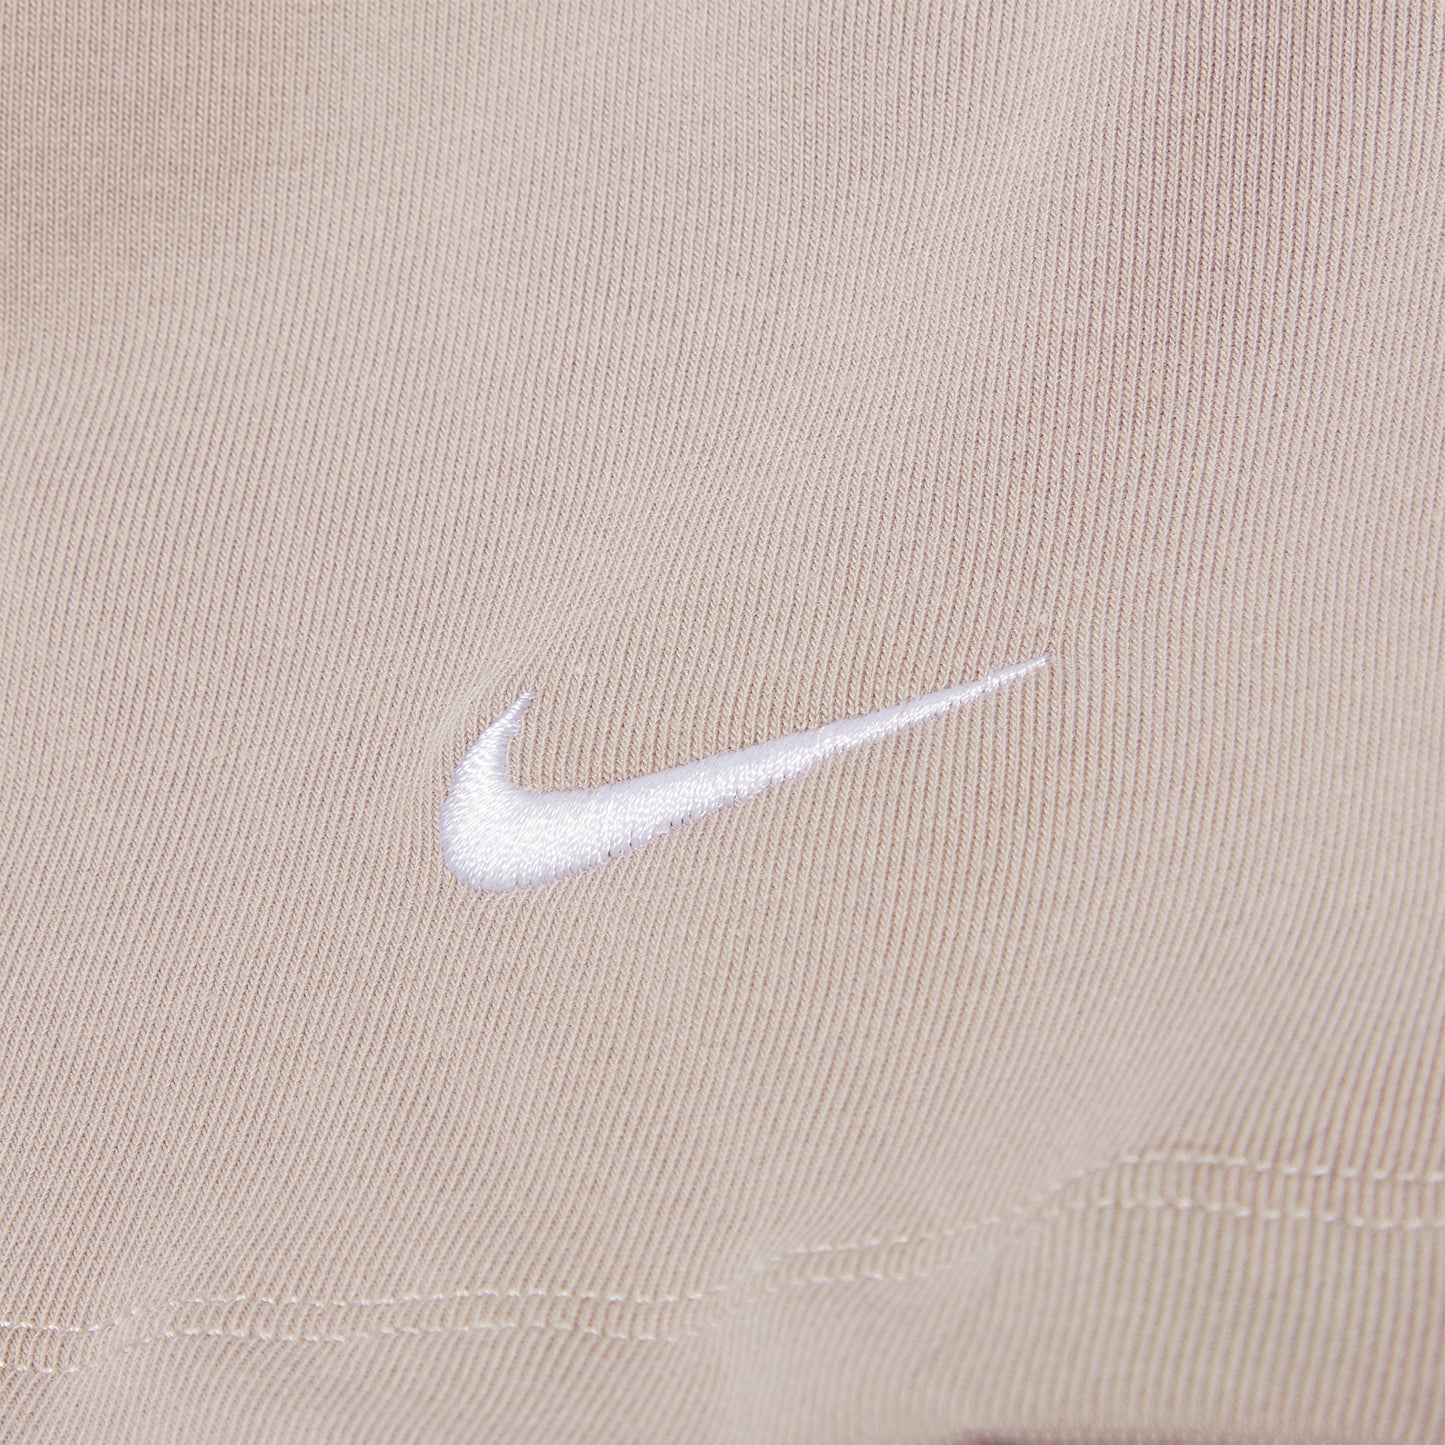 Nike Womens Mid Rise Biker Shorts (Diffused Taupe/White)